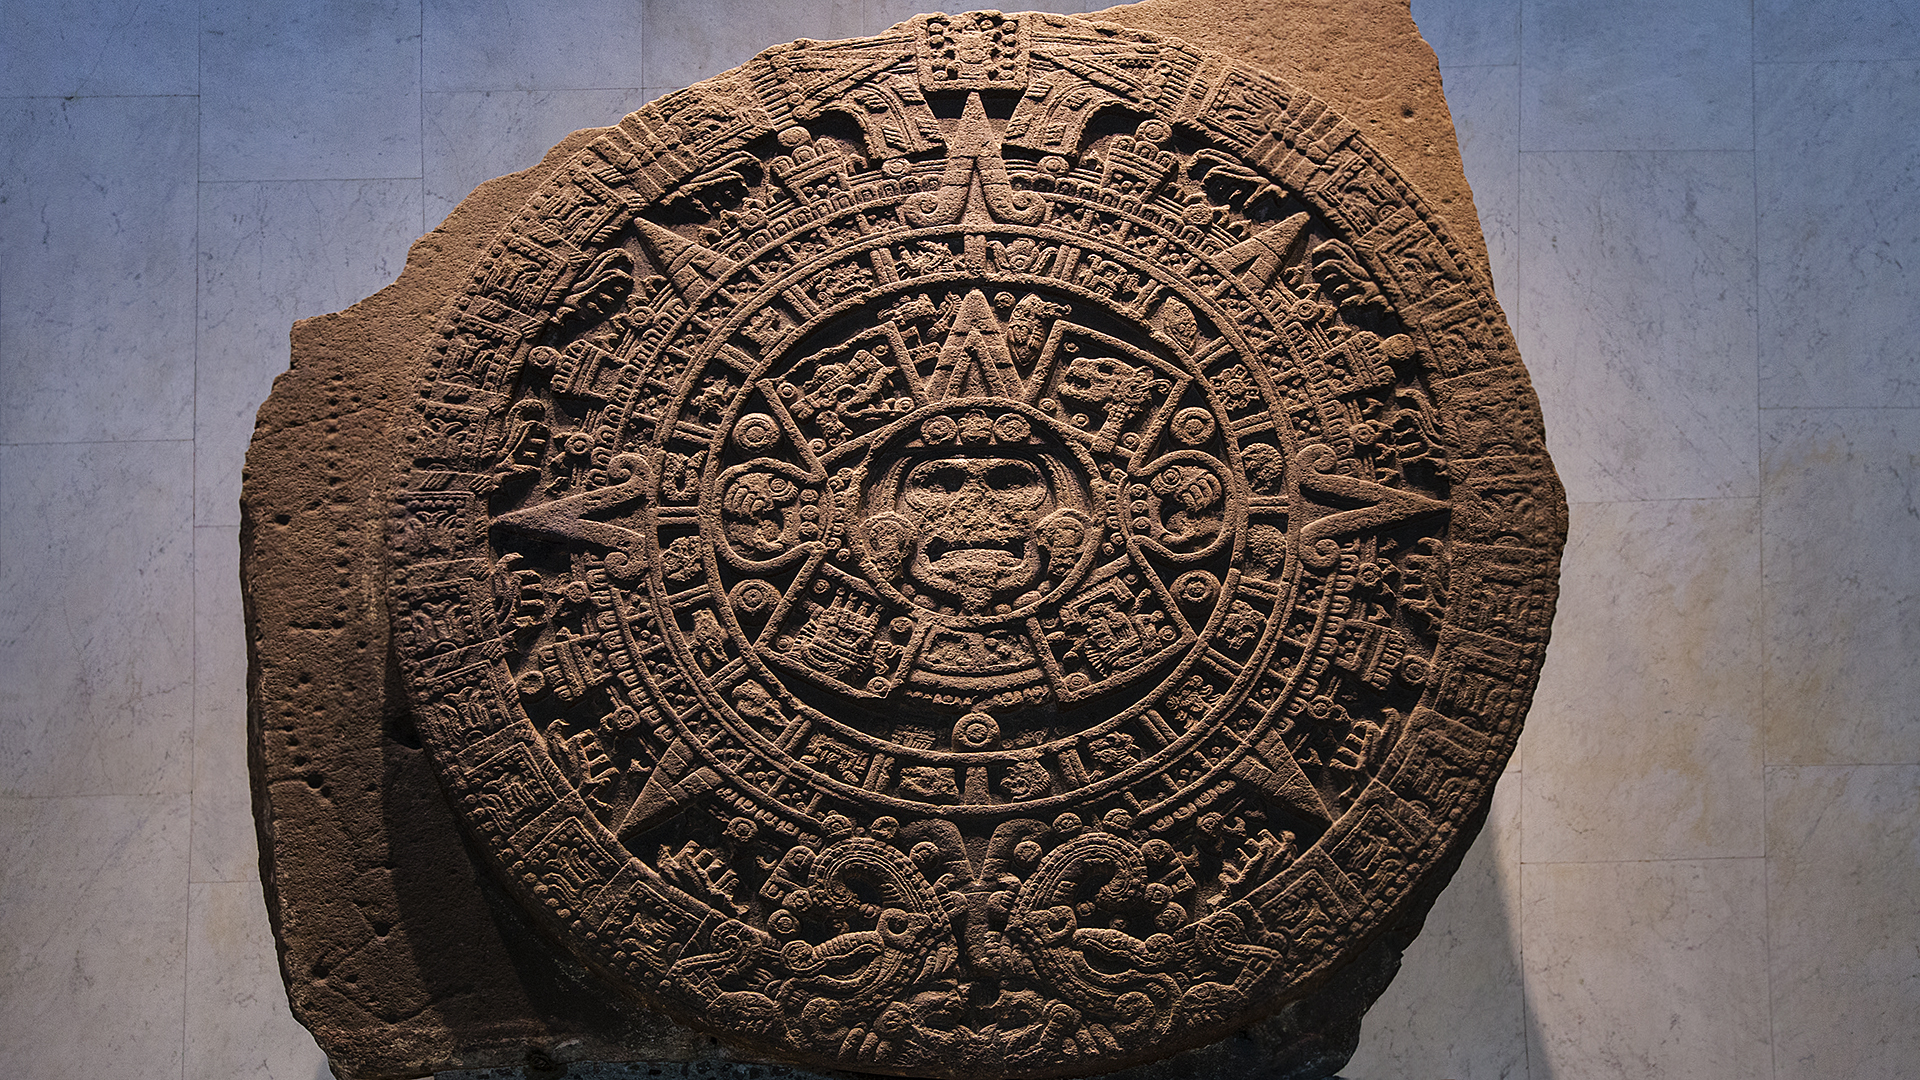 Aztec Stone of the Sun - the exact purpose and meaning of the stone is unclear 14th-16th century